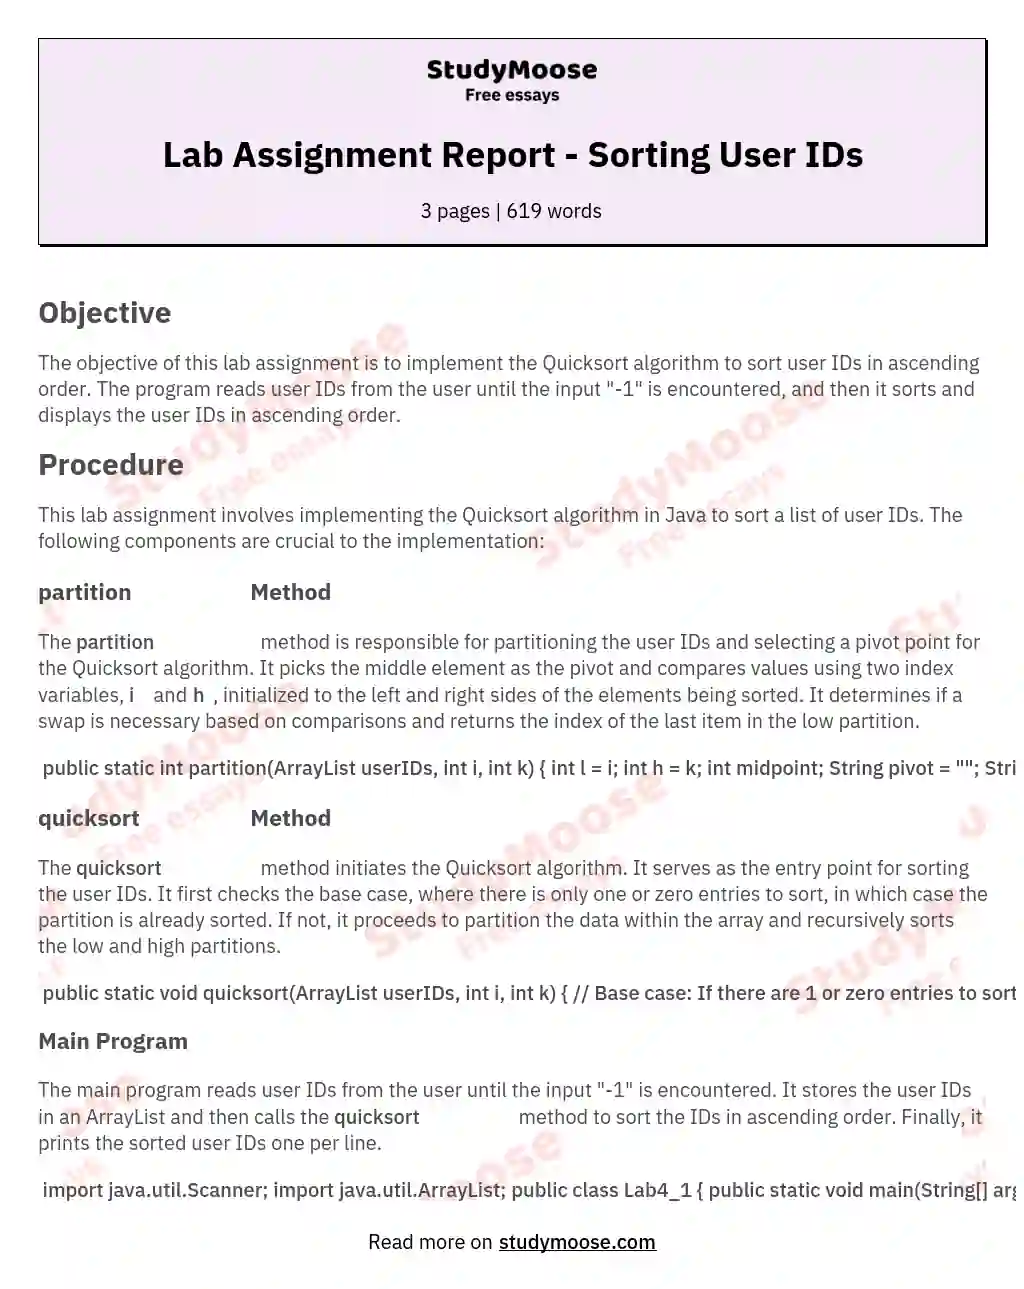 Lab Assignment Report - Sorting User IDs essay